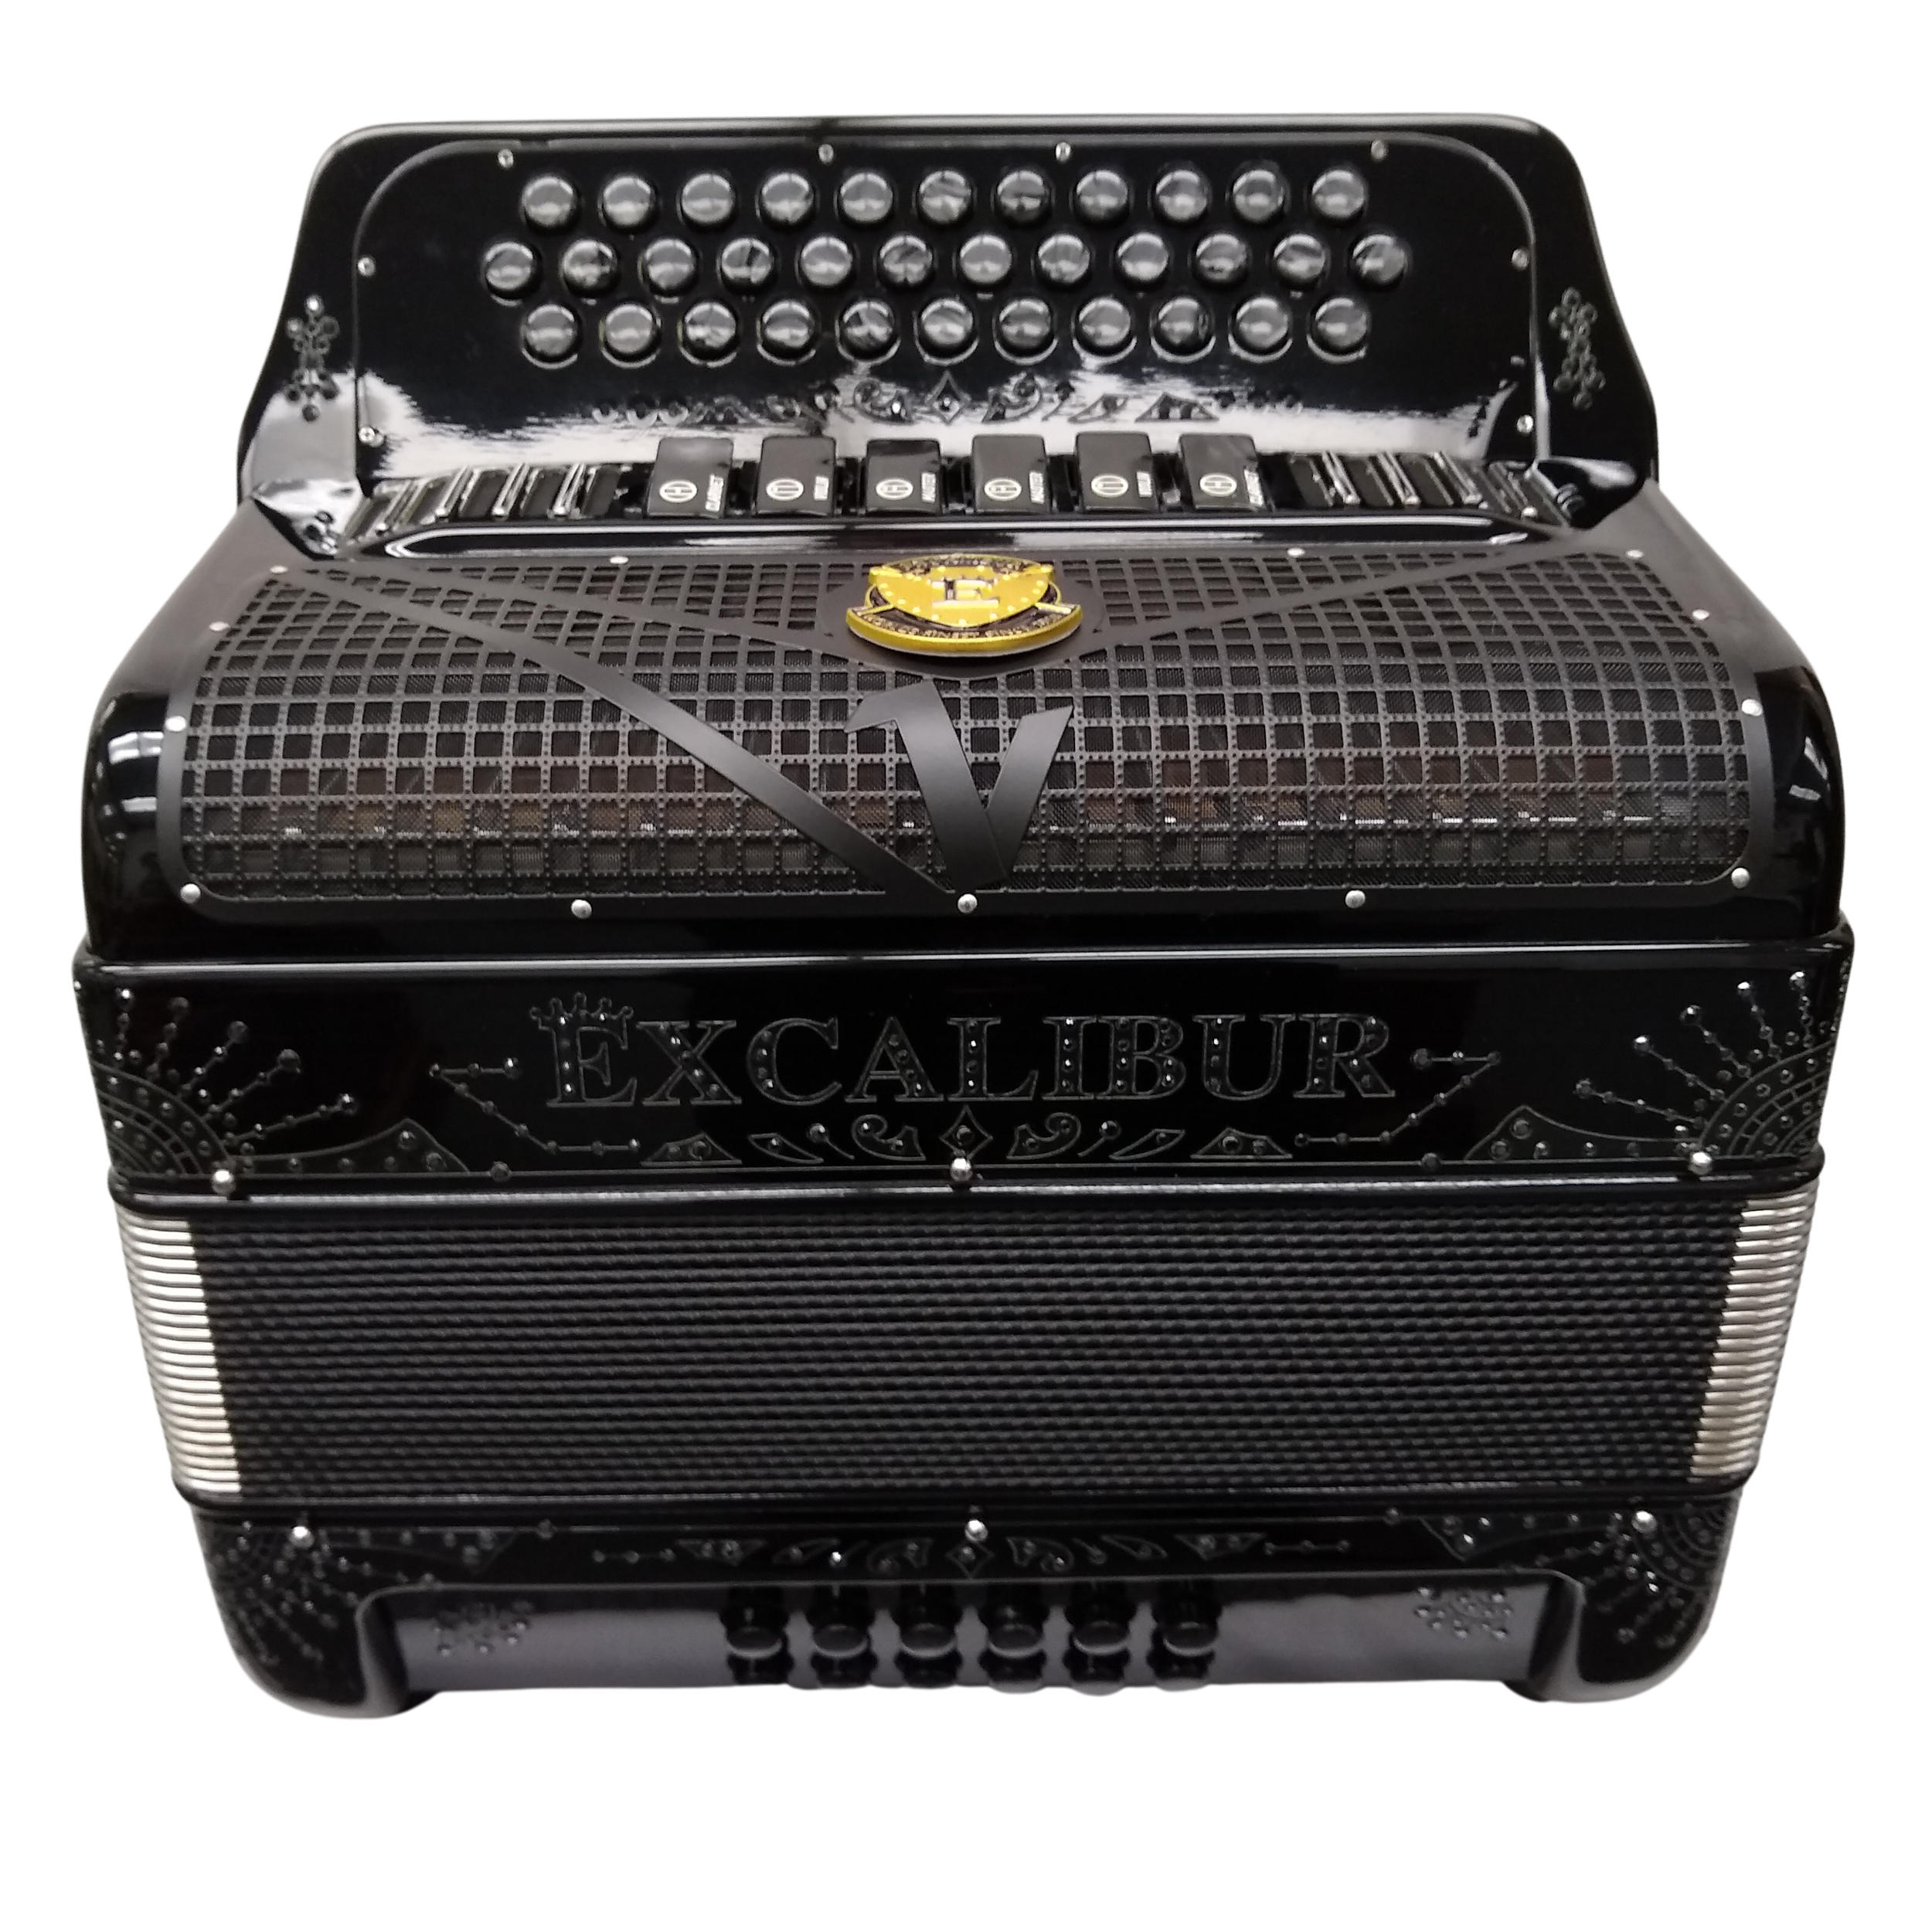 Excalibur Crown Series Button Accordion Two Tone 6 Switch Stealth Black